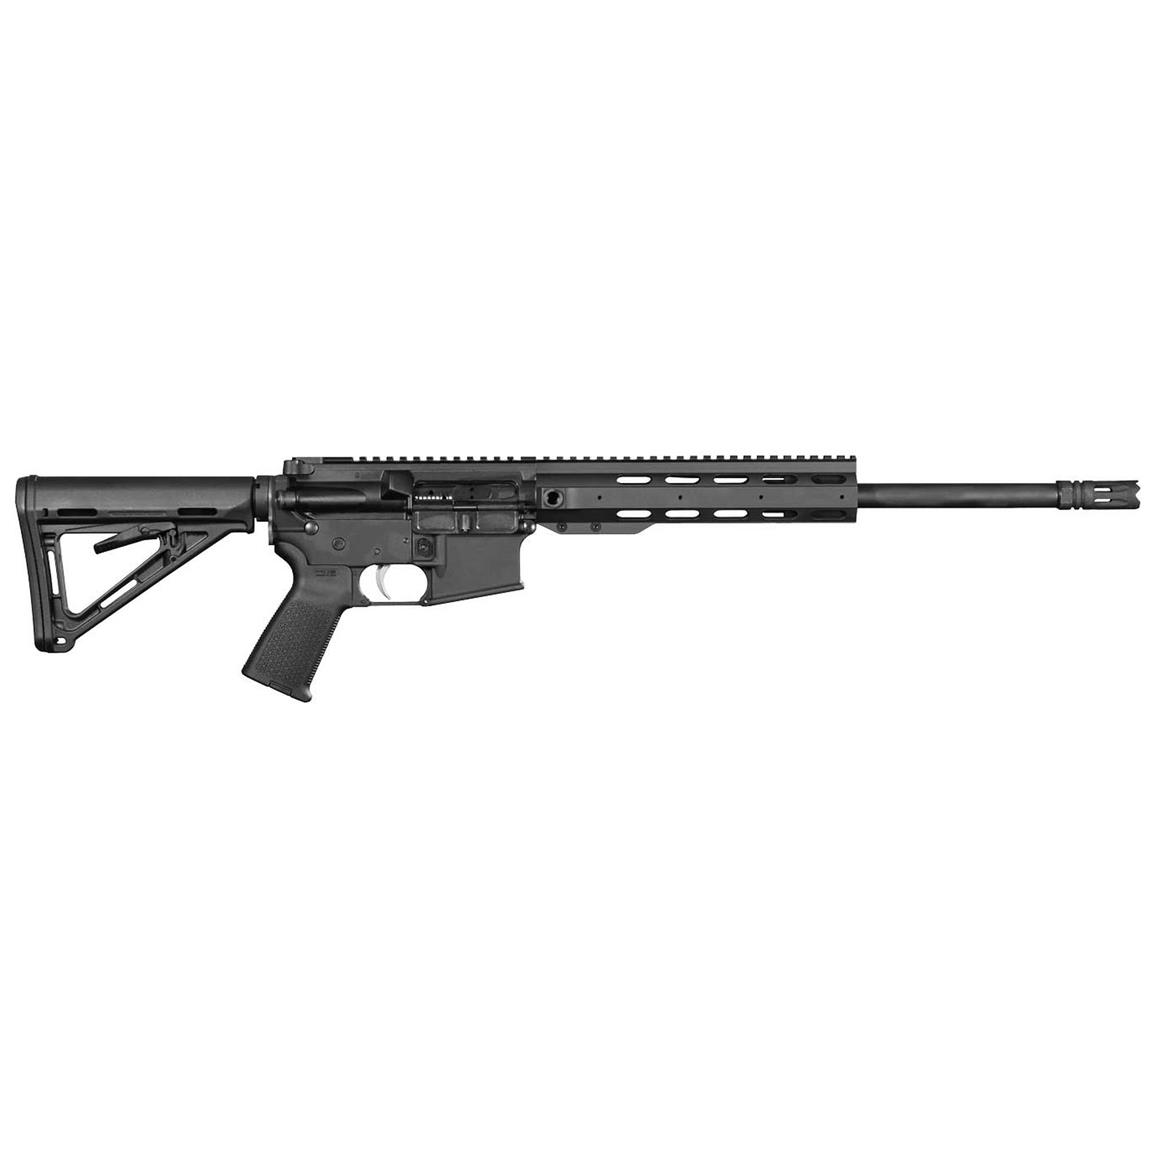 Anderson AM15 Blackout AR-15, Semi-Automatic, .300 AAC Blackout, 16" Barrel, RF85, 30+1 Rounds